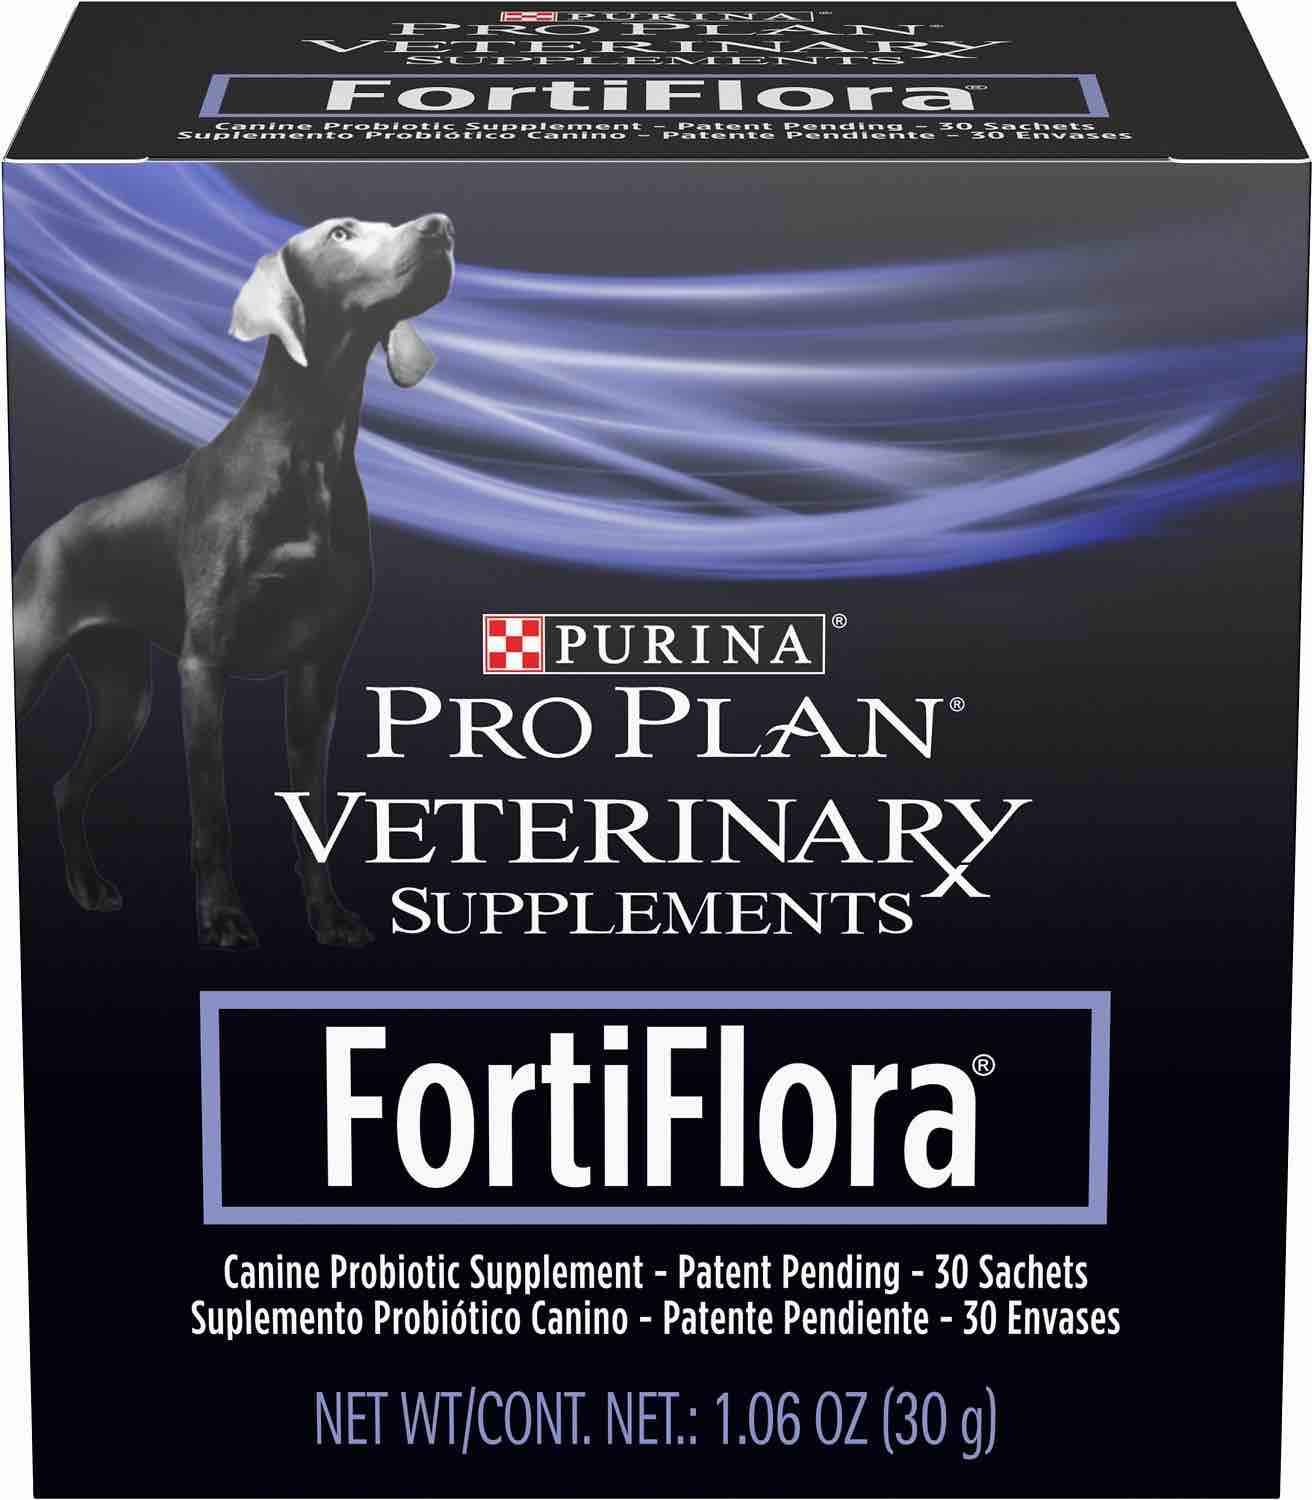 Purina Pro Plan Veterinary Supplements FortiFlora Powder for Dogs box of 30 sachets 1